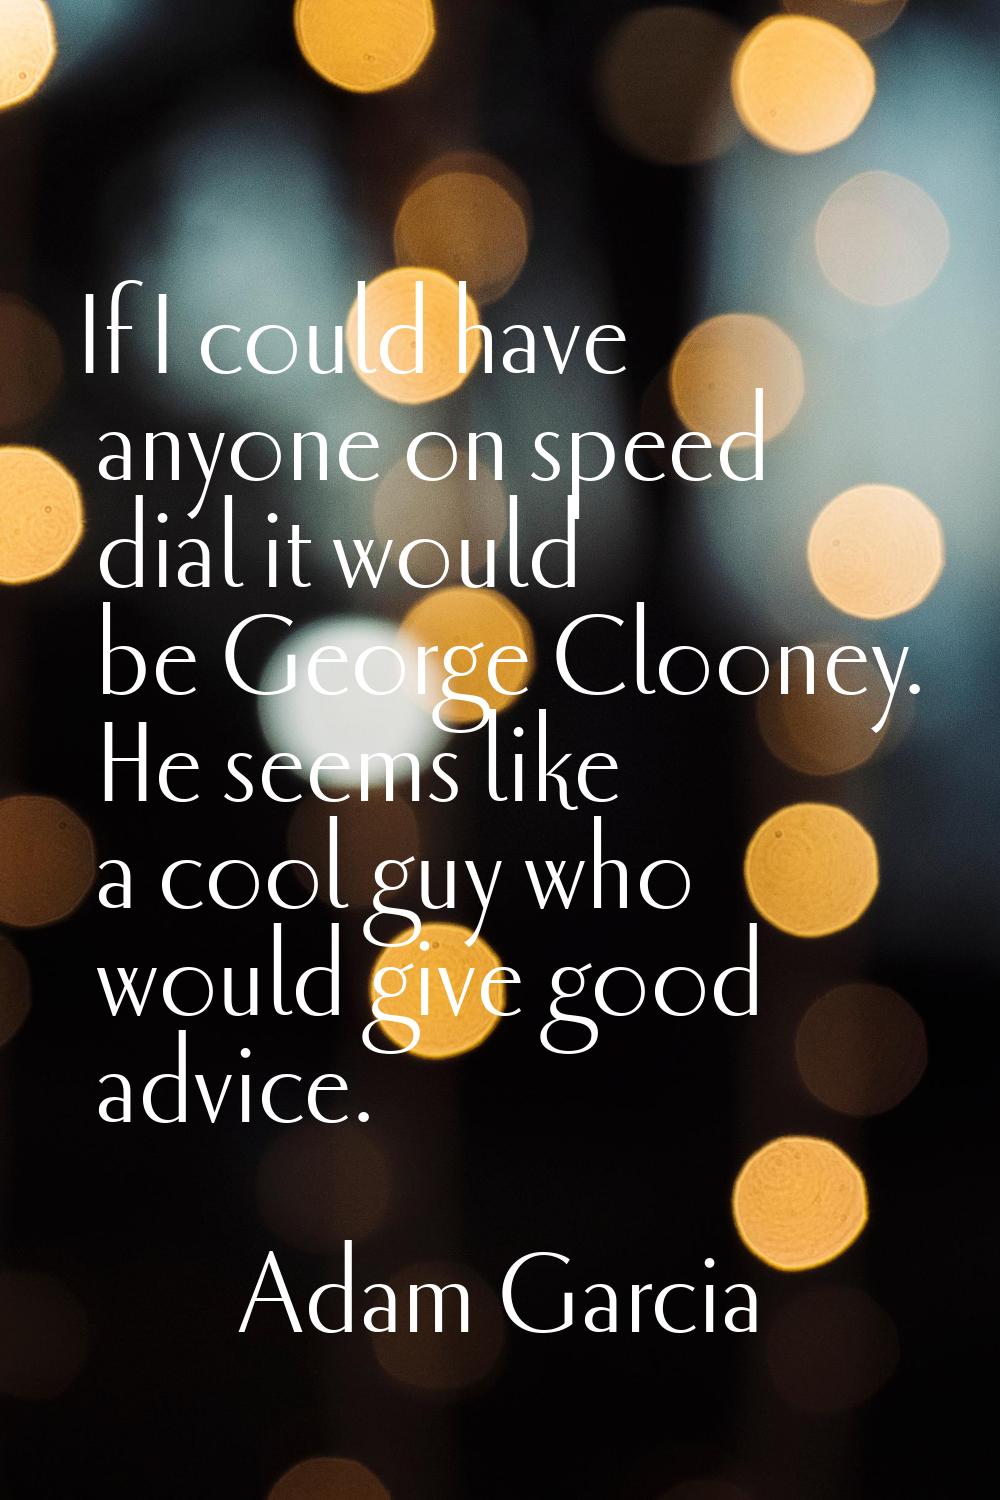 If I could have anyone on speed dial it would be George Clooney. He seems like a cool guy who would